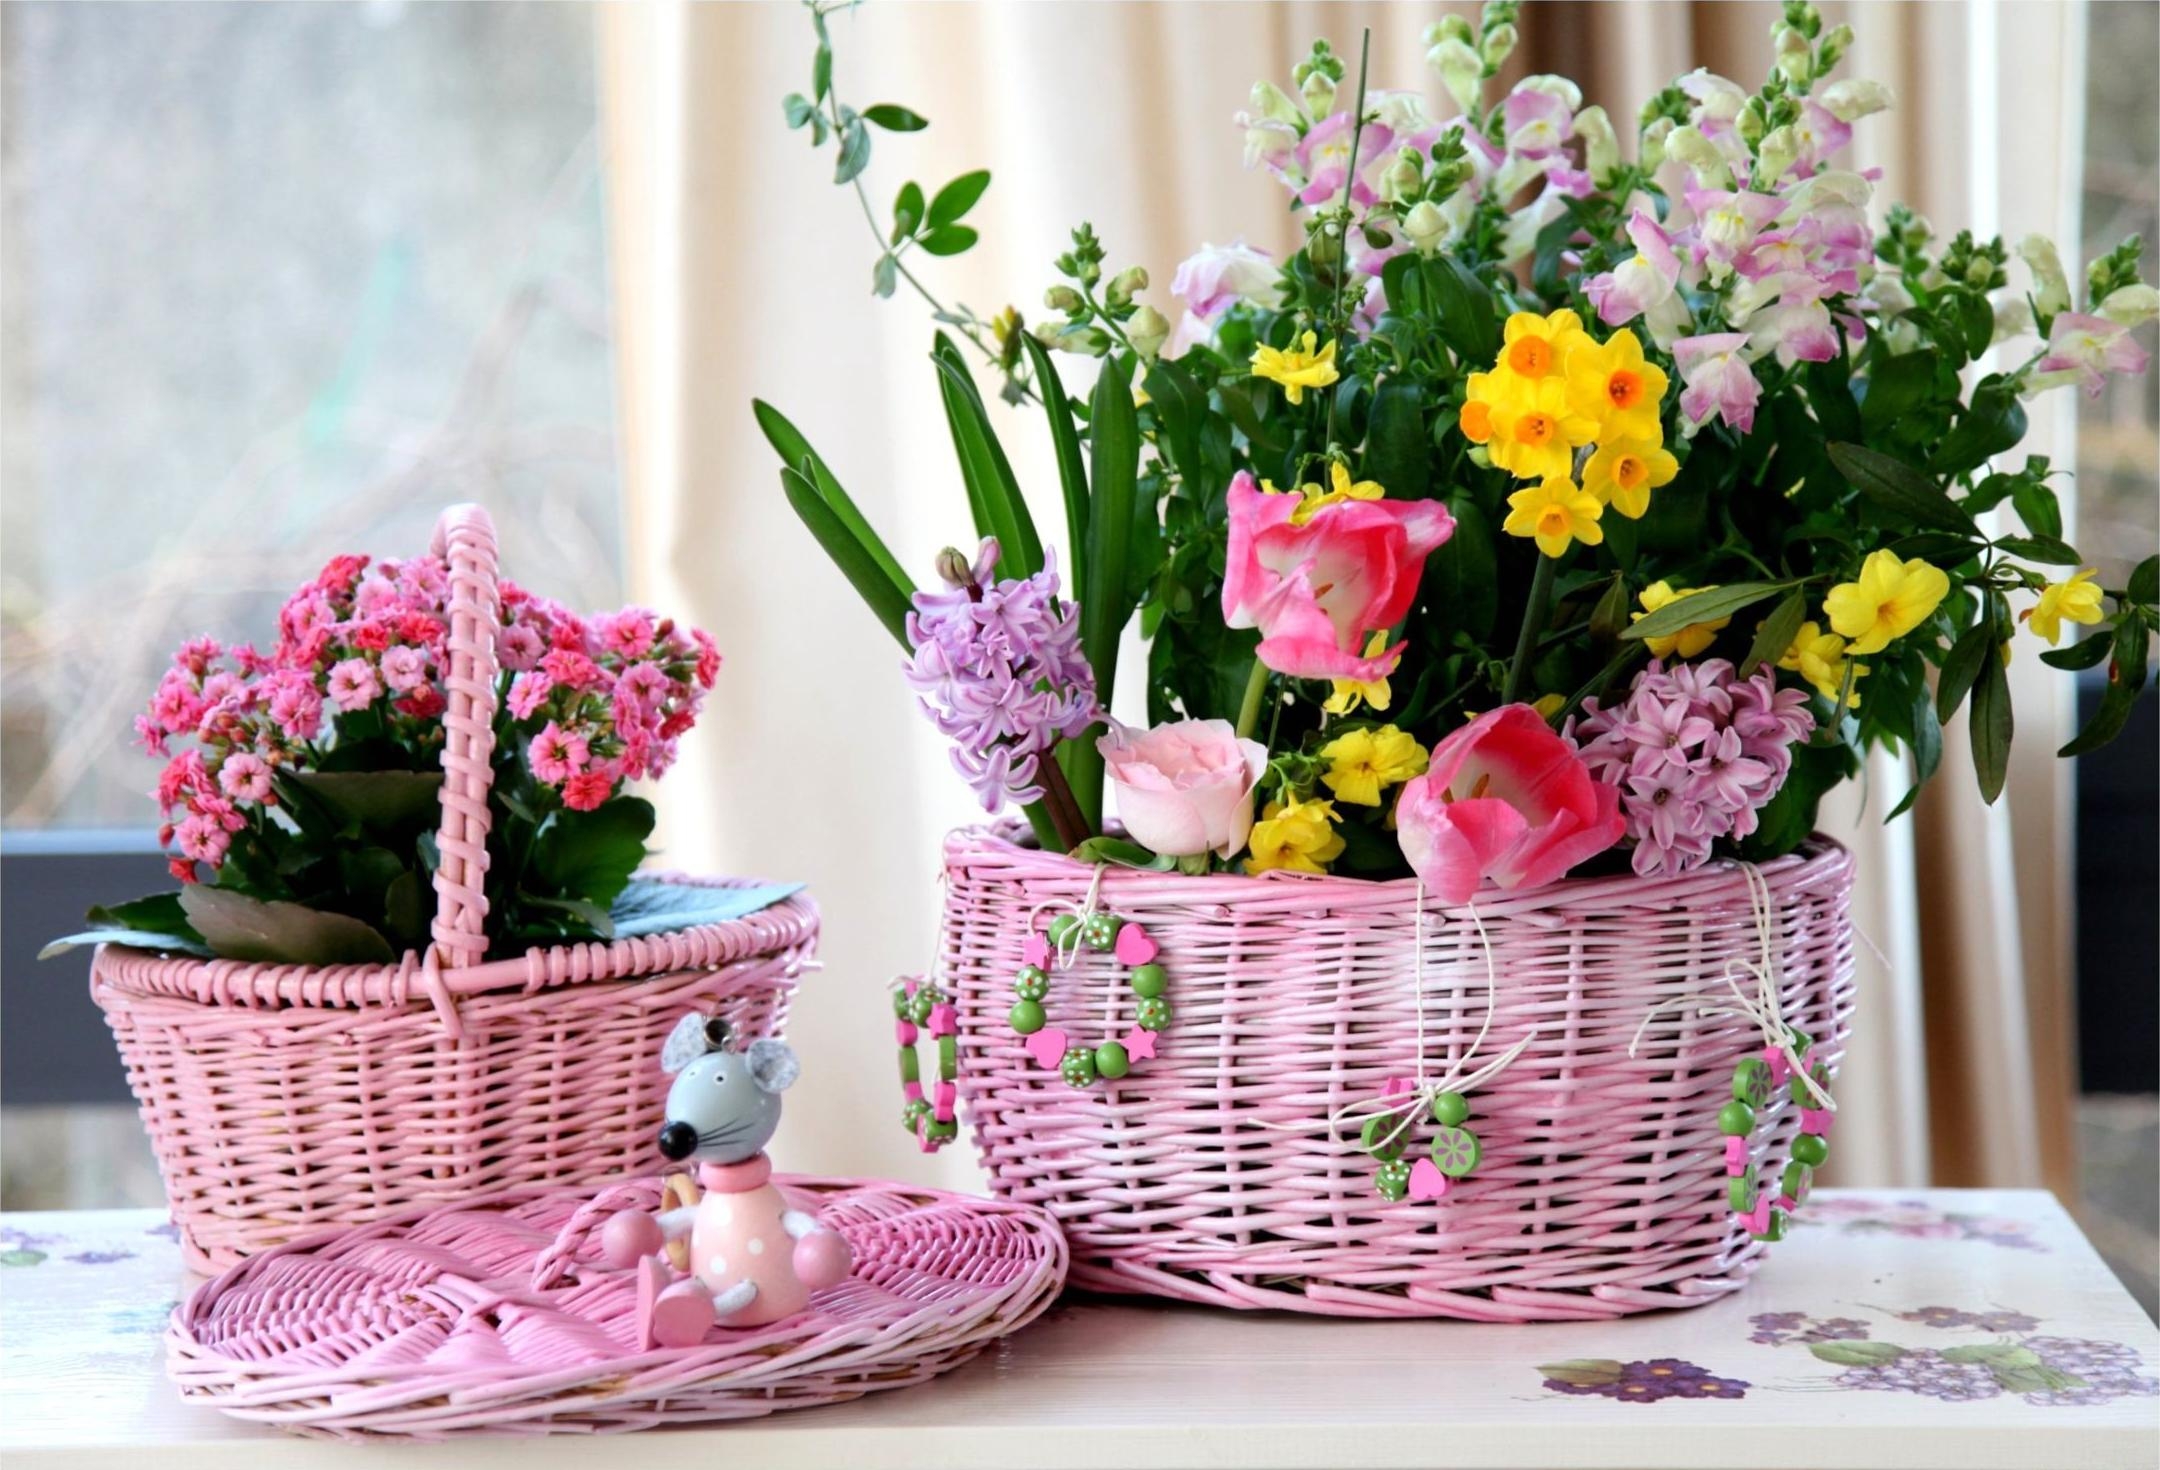 tulips, rose flower, flowers, narcissussi, rose, mouse, basket, hyacinths, baskets, freesia